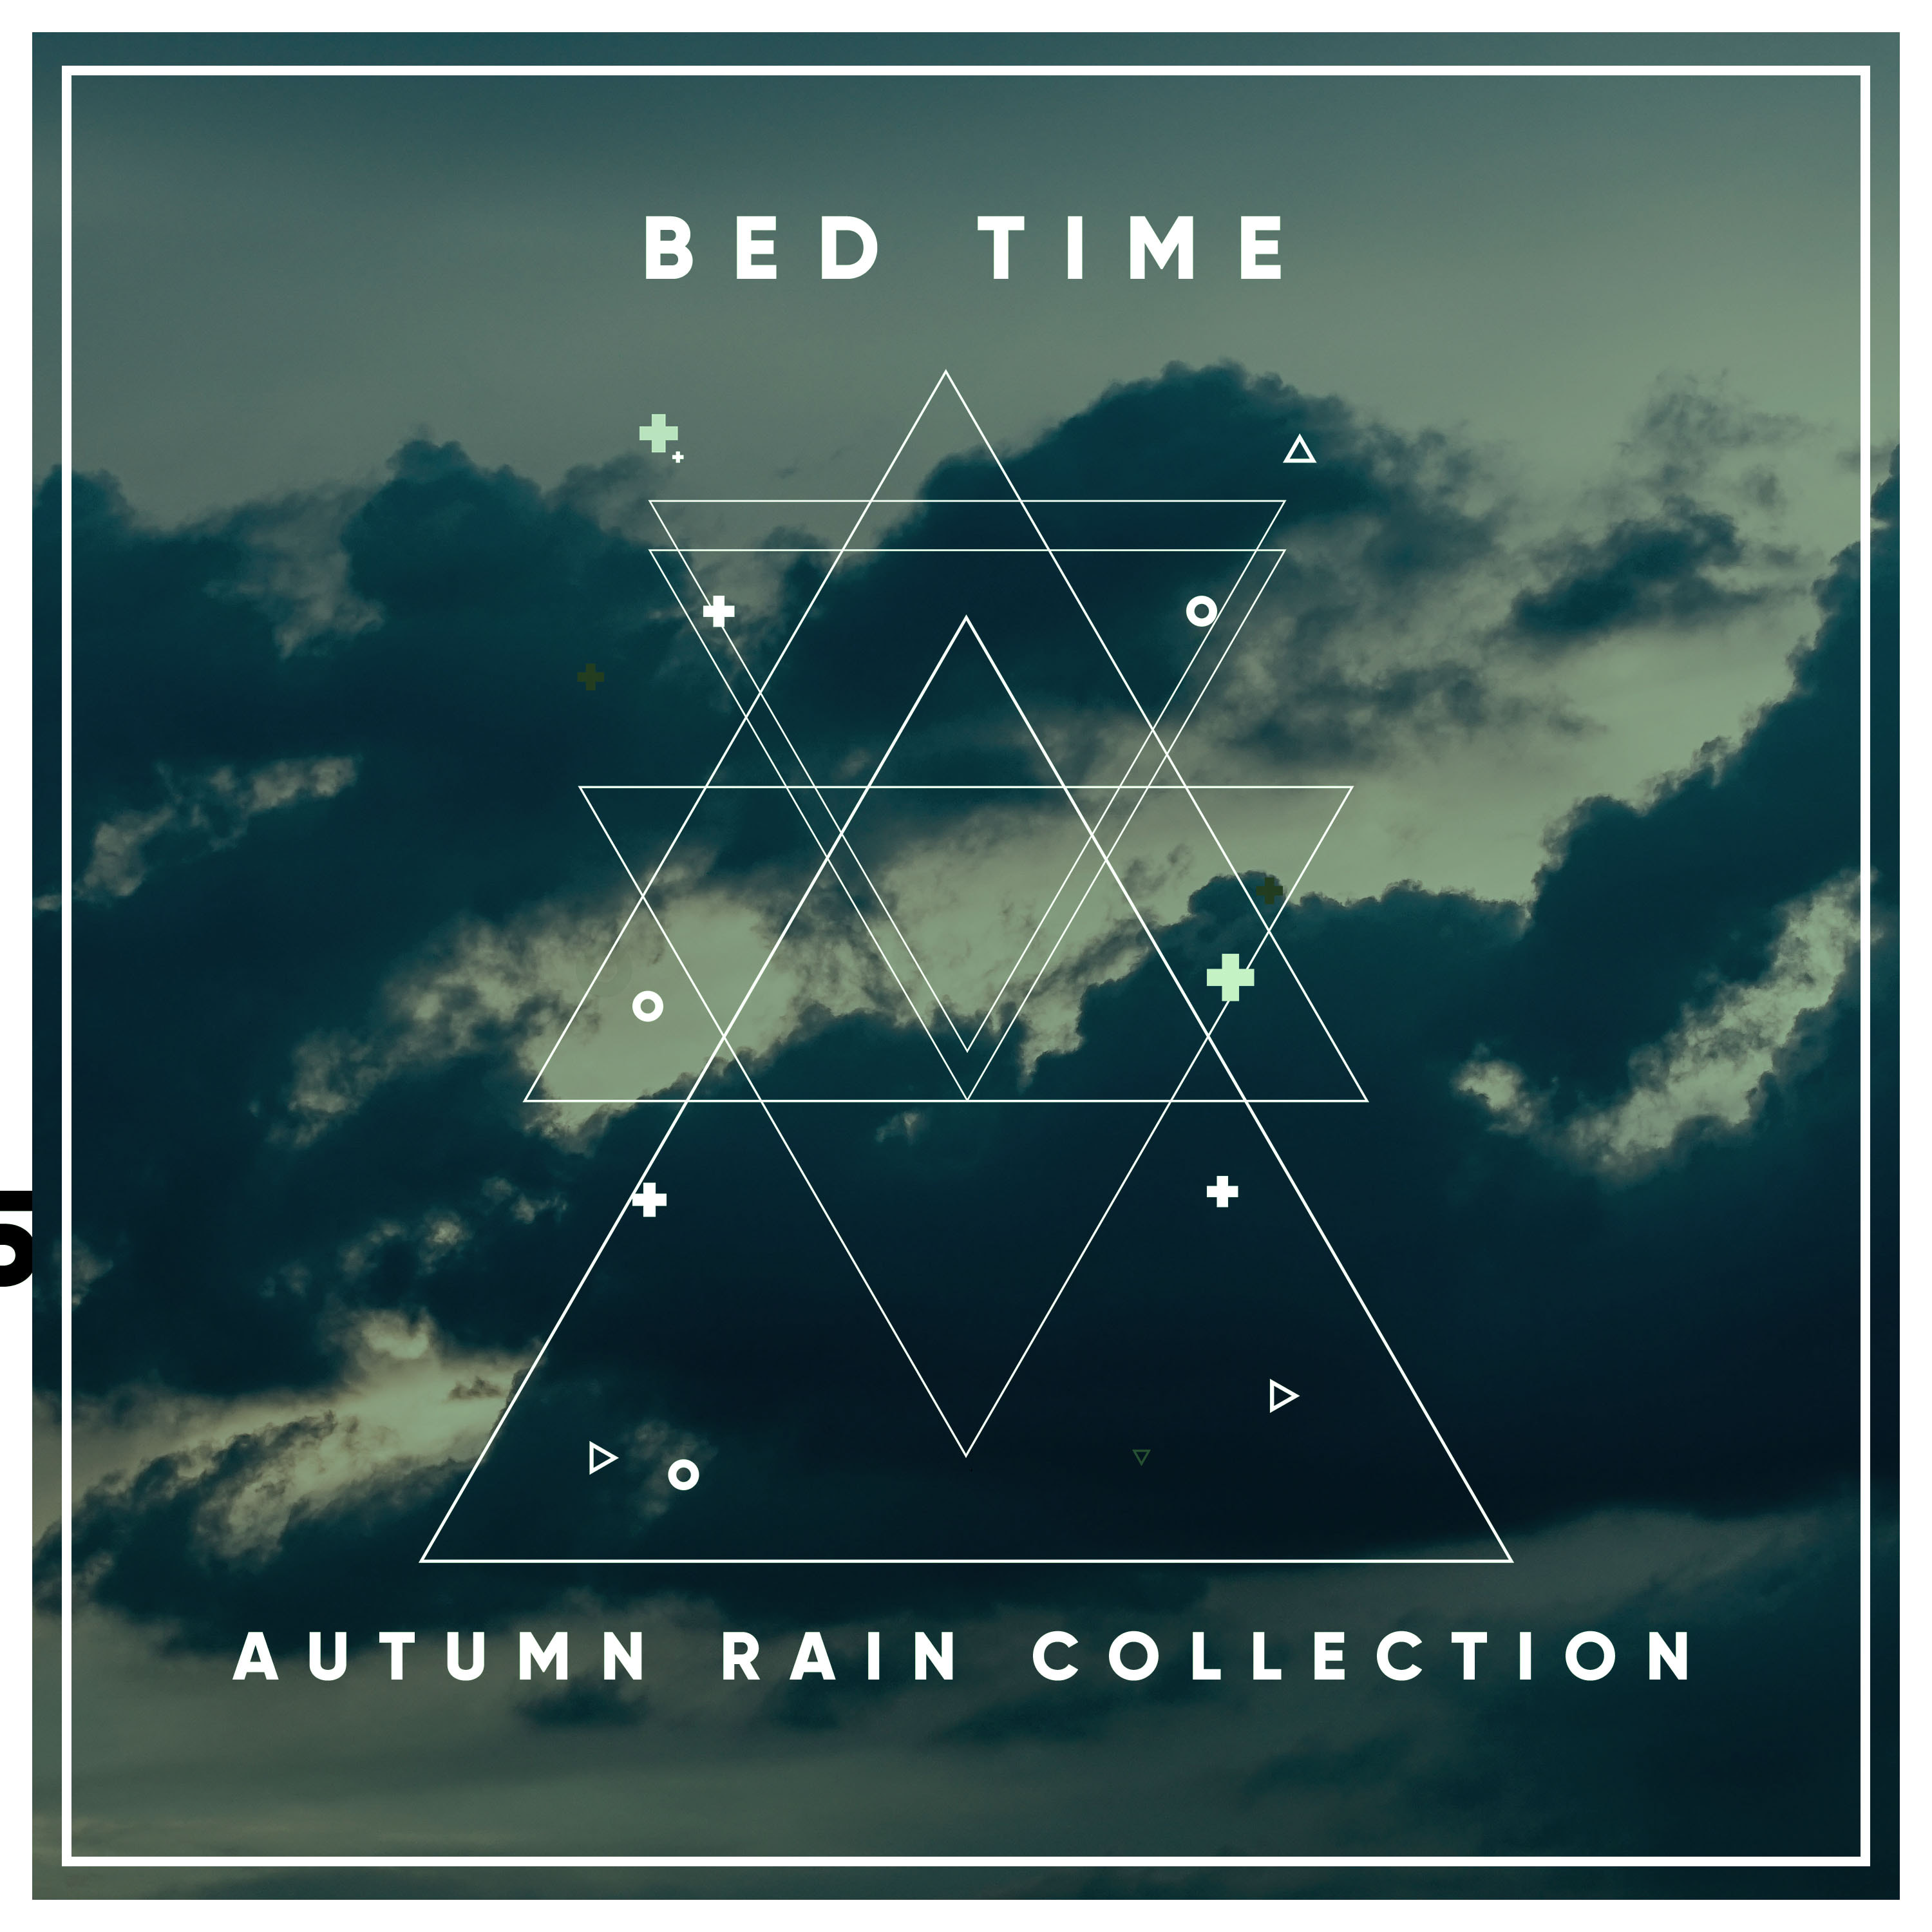 #11 Bed Time Autumn Rain Collection from Nature